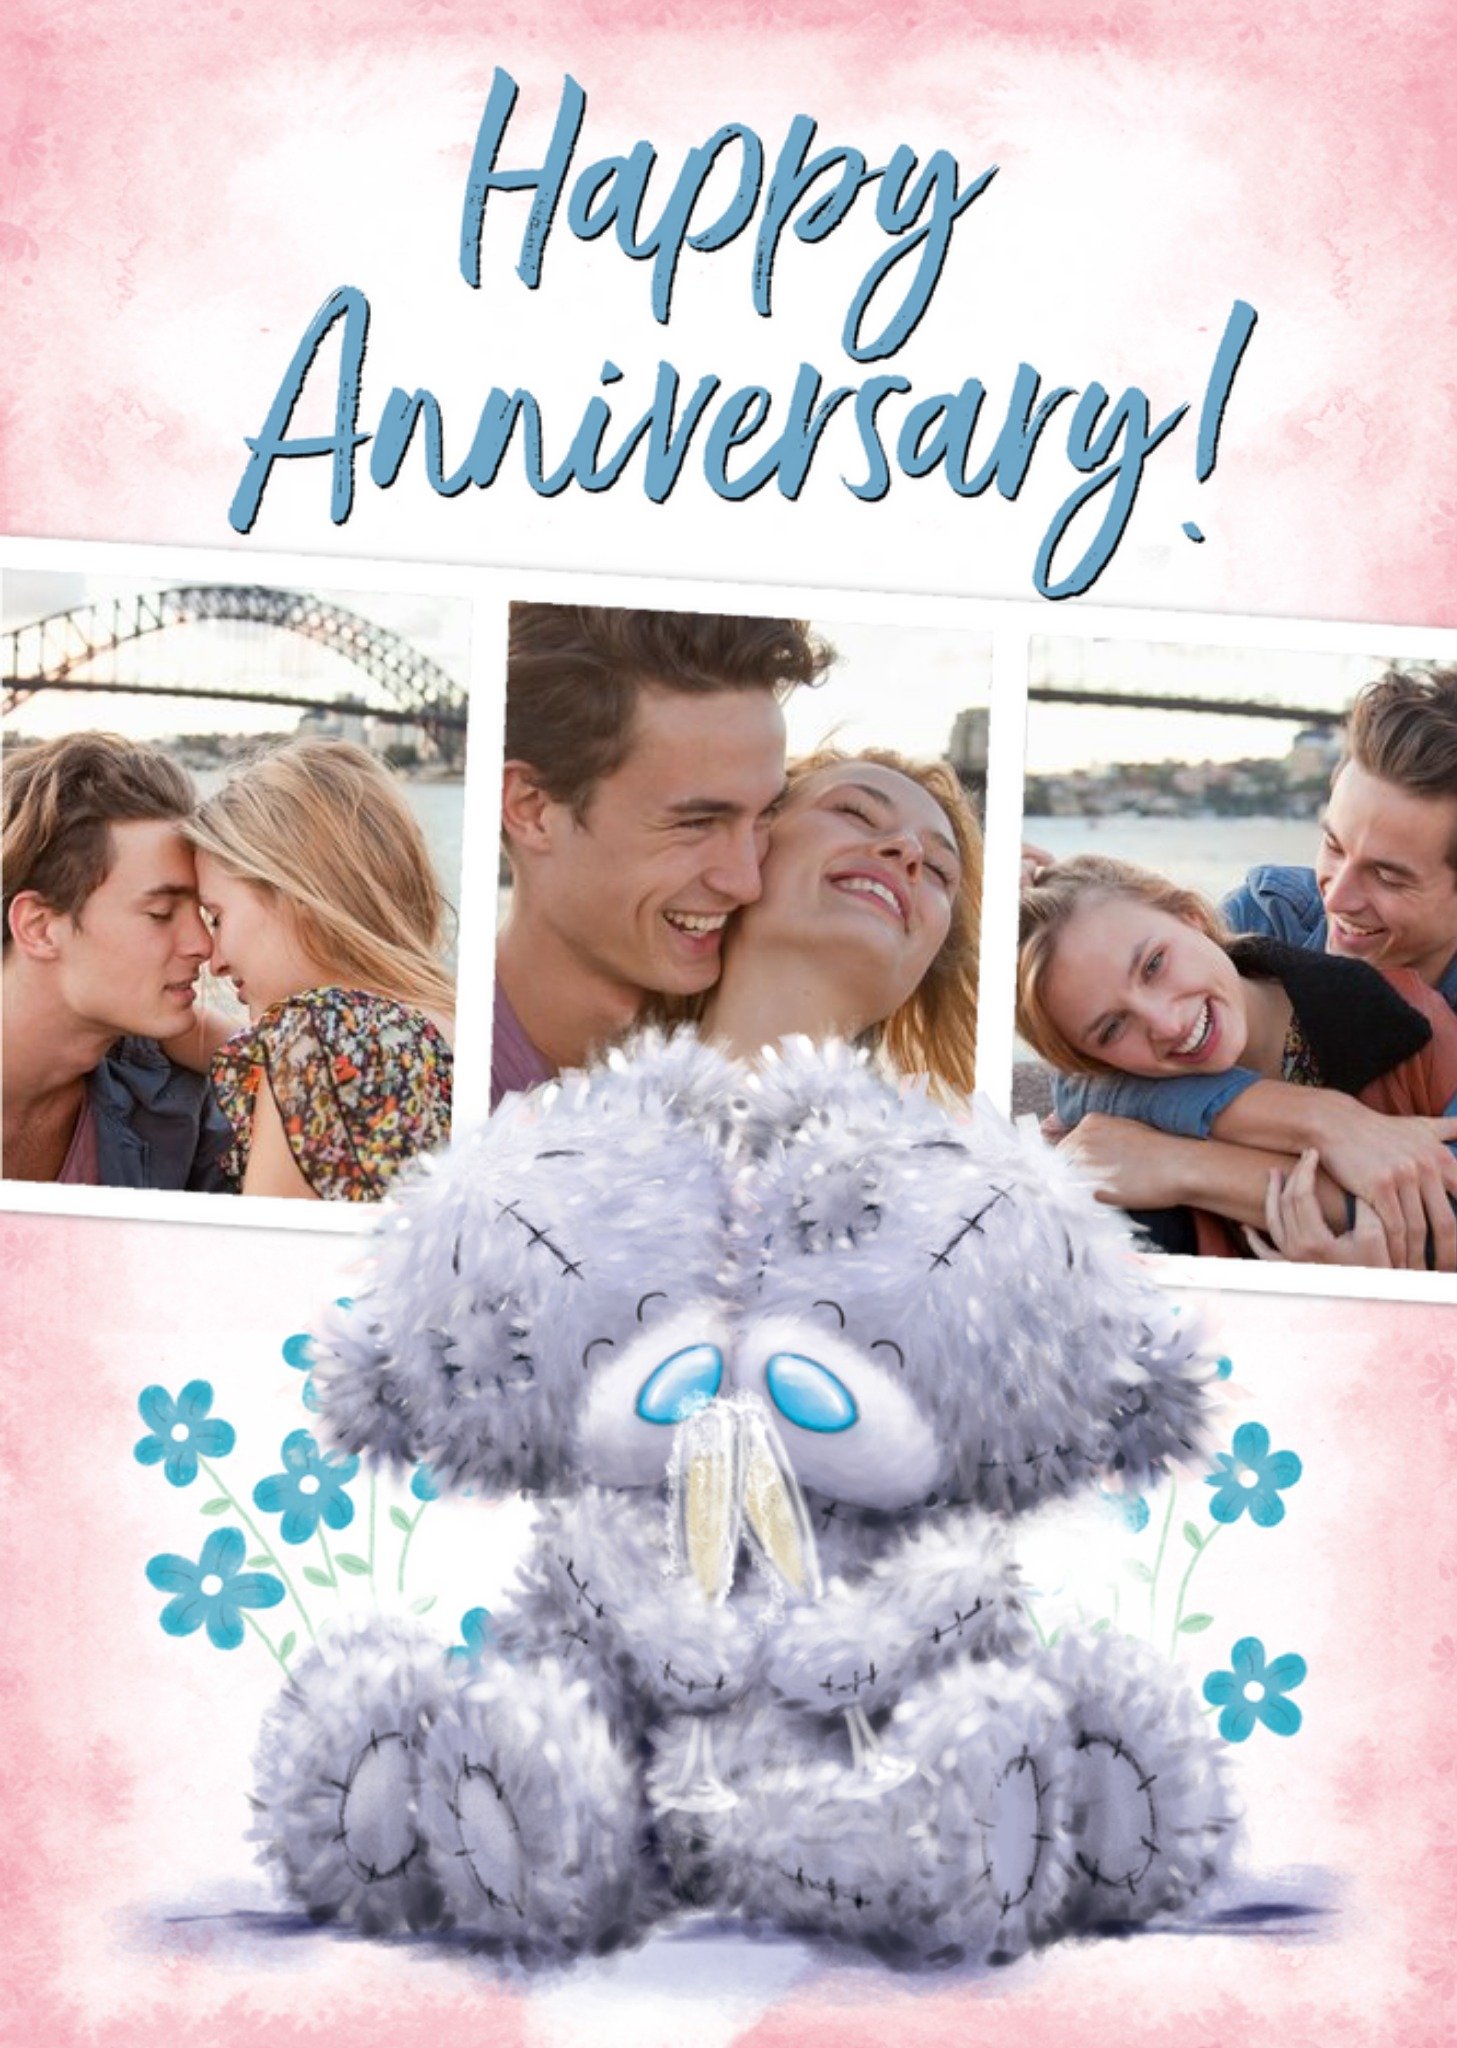 Me To You Tatty Teddy Toasting Photo Upload Anniversary Card, Large